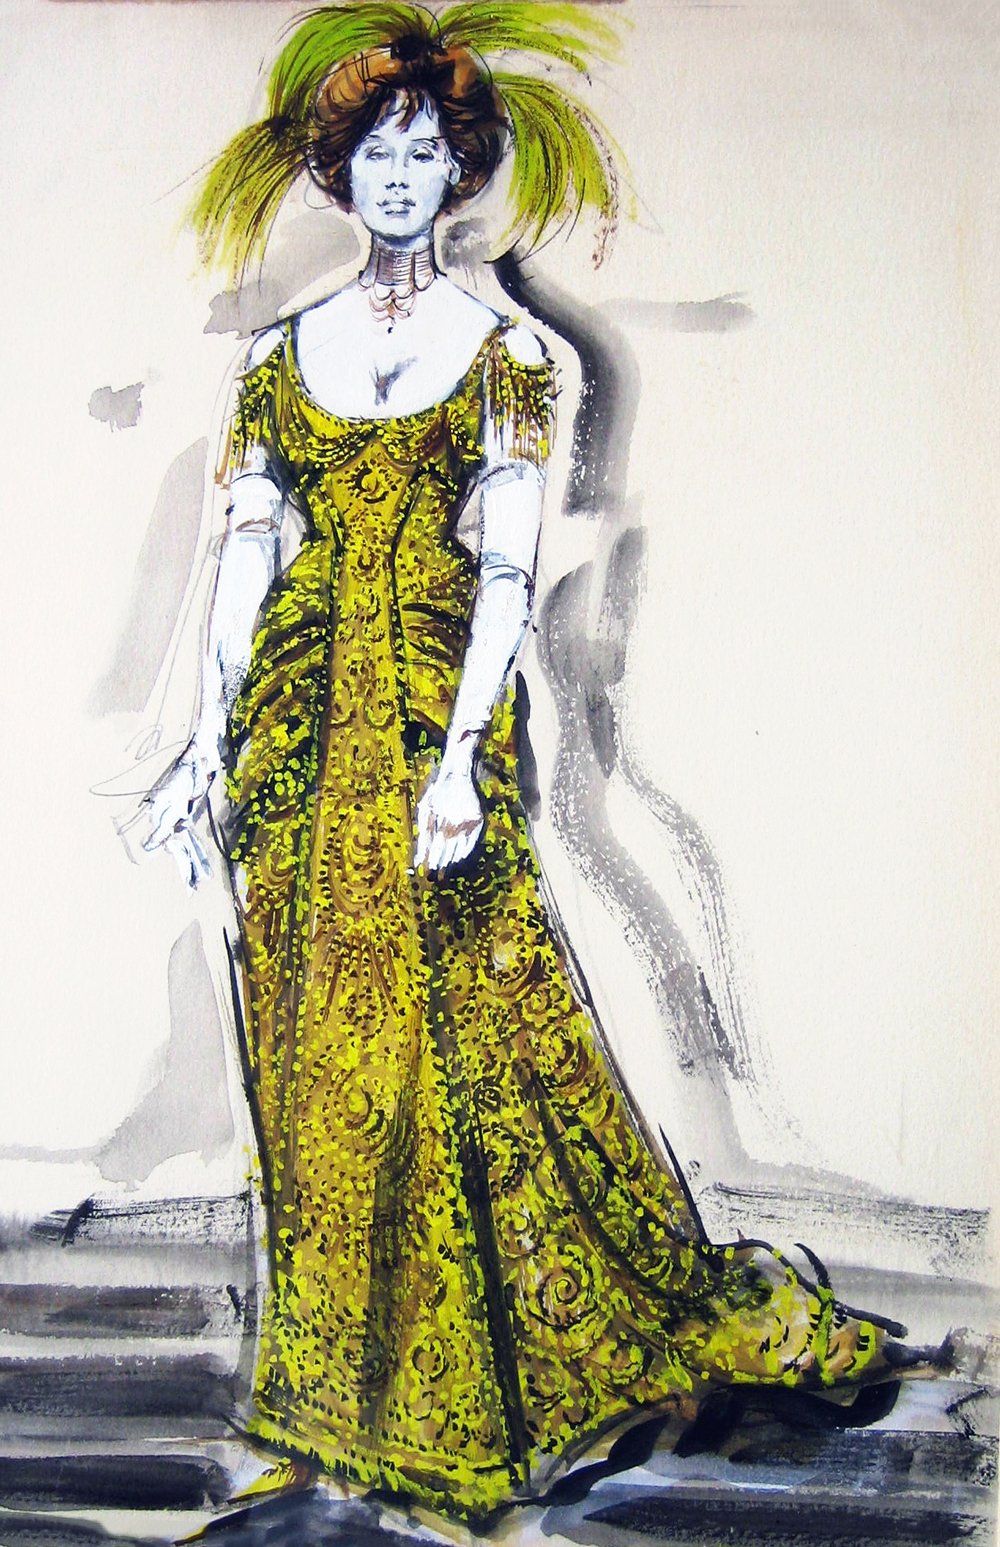 Sharaff's rendering of the gold gown